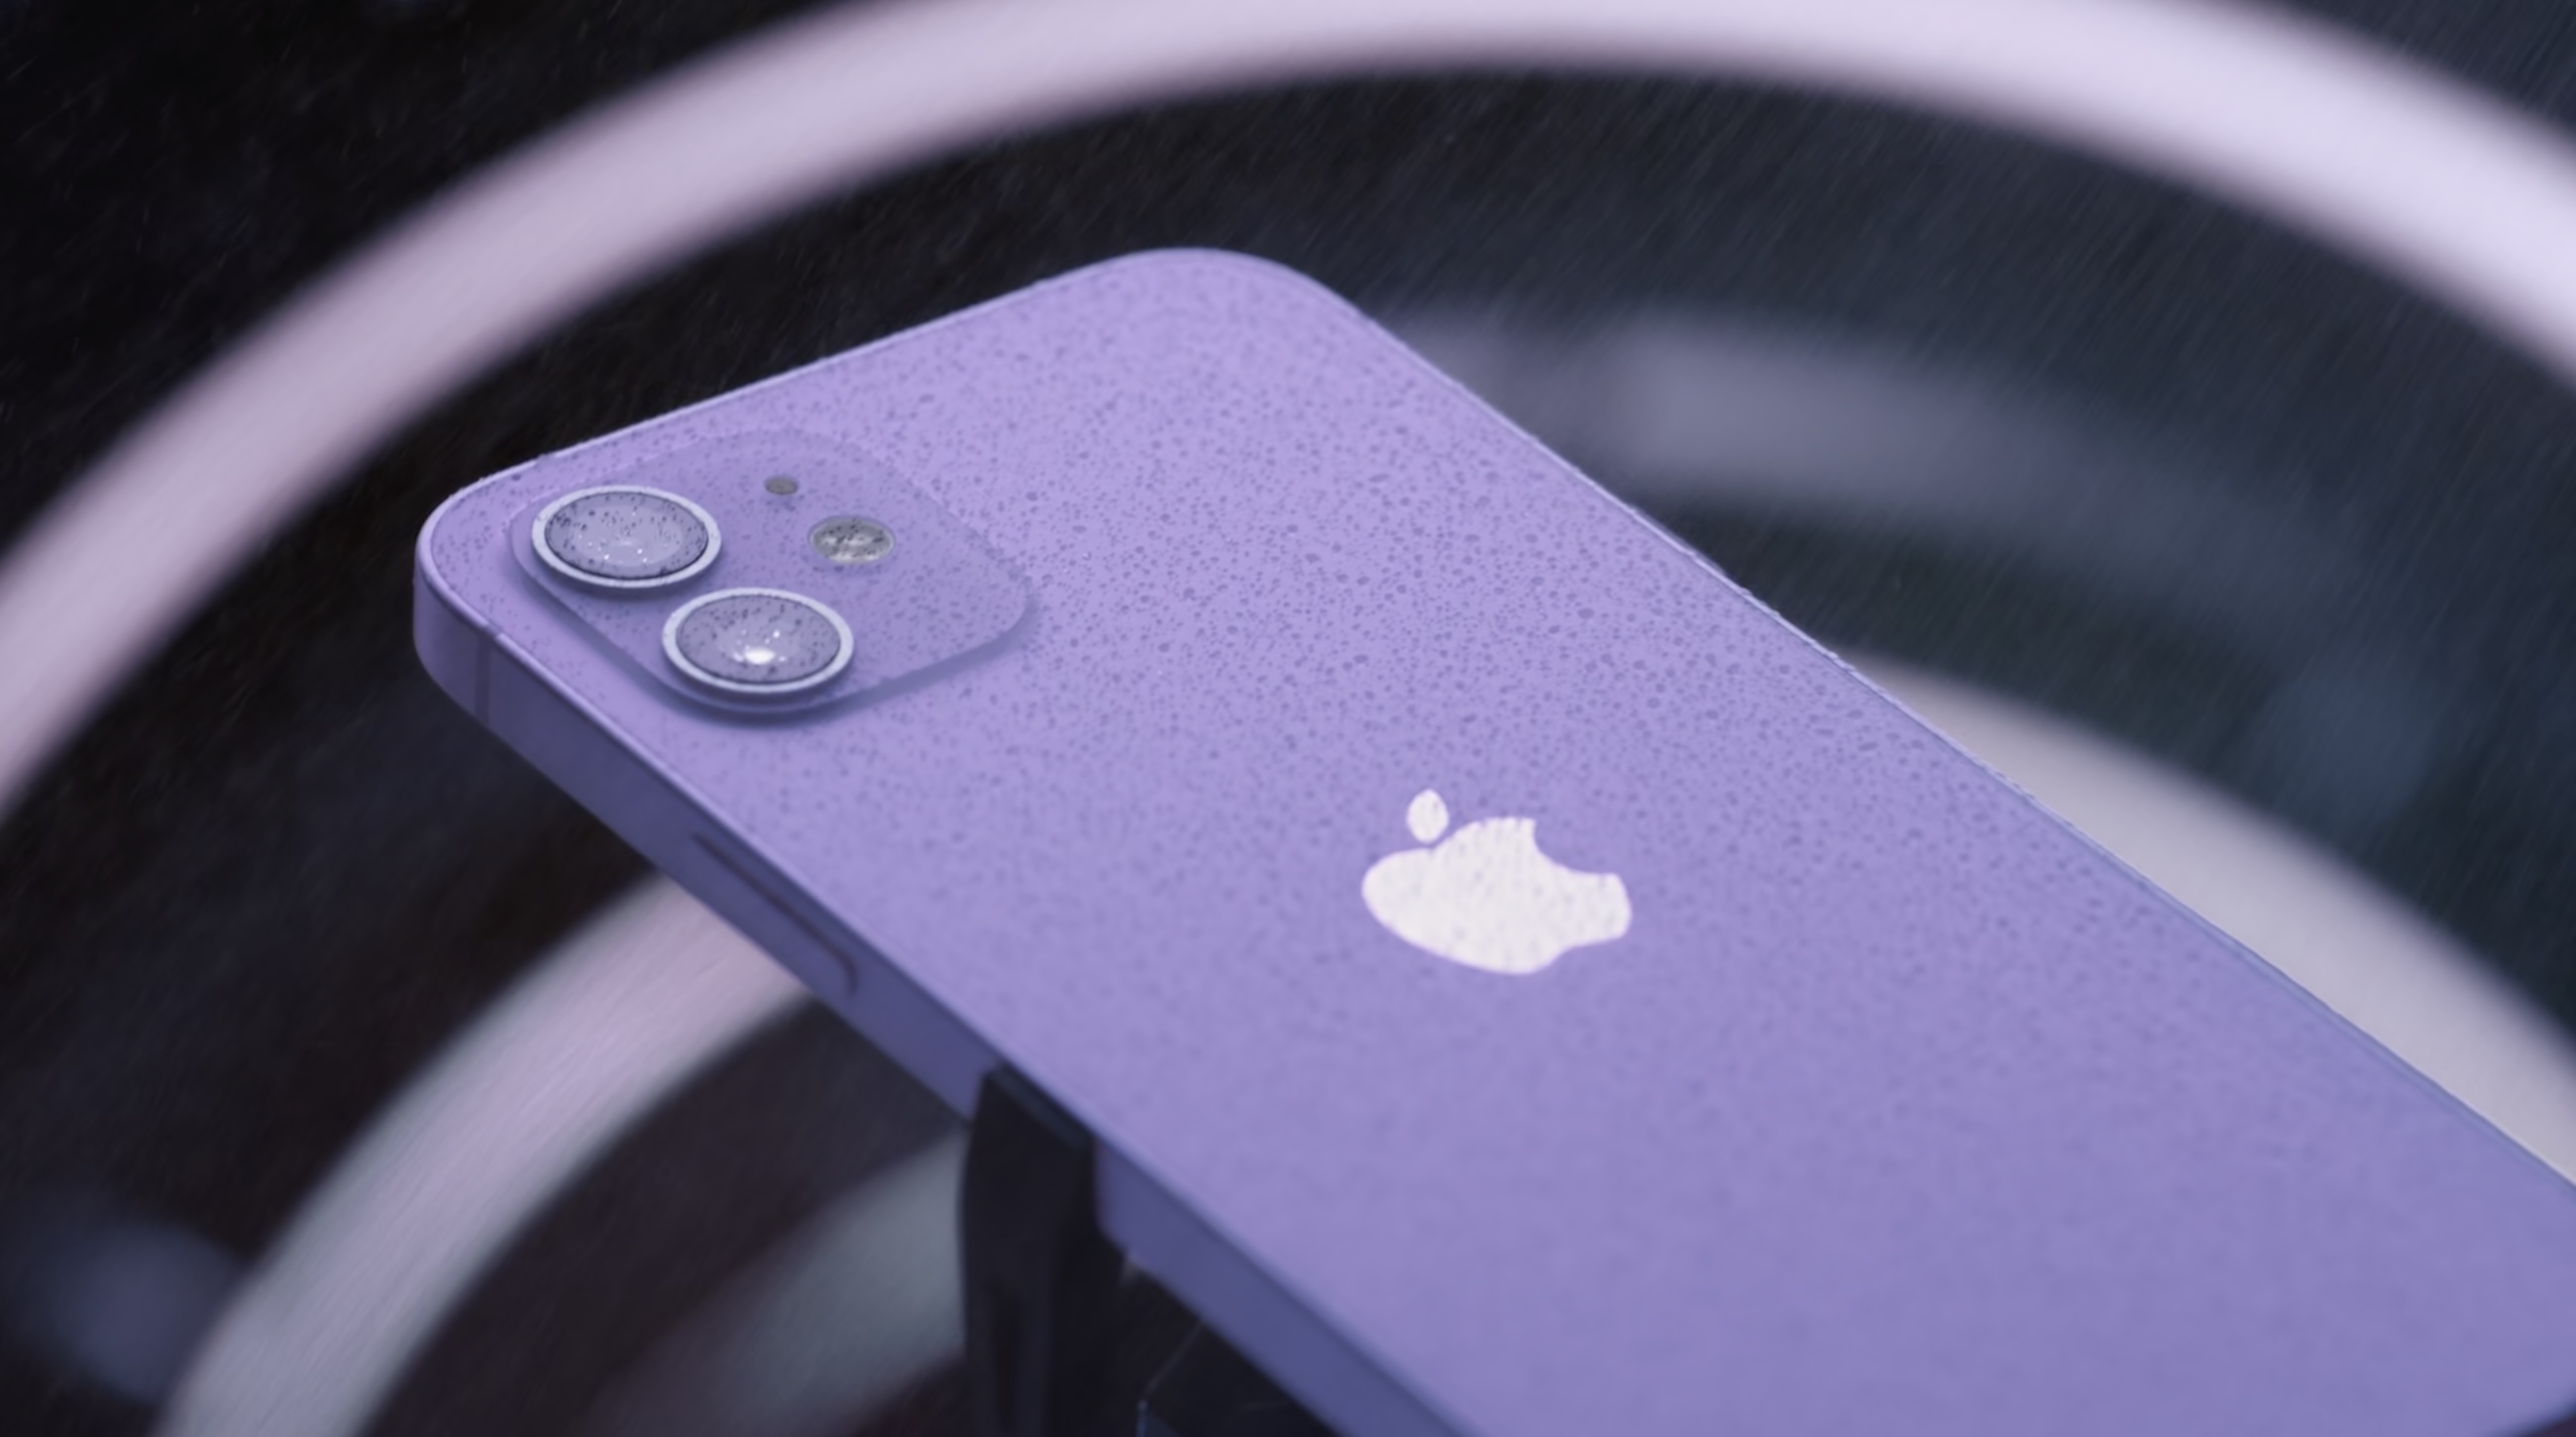 Apple announces new purple iPhone 12 color, available for pre-order on